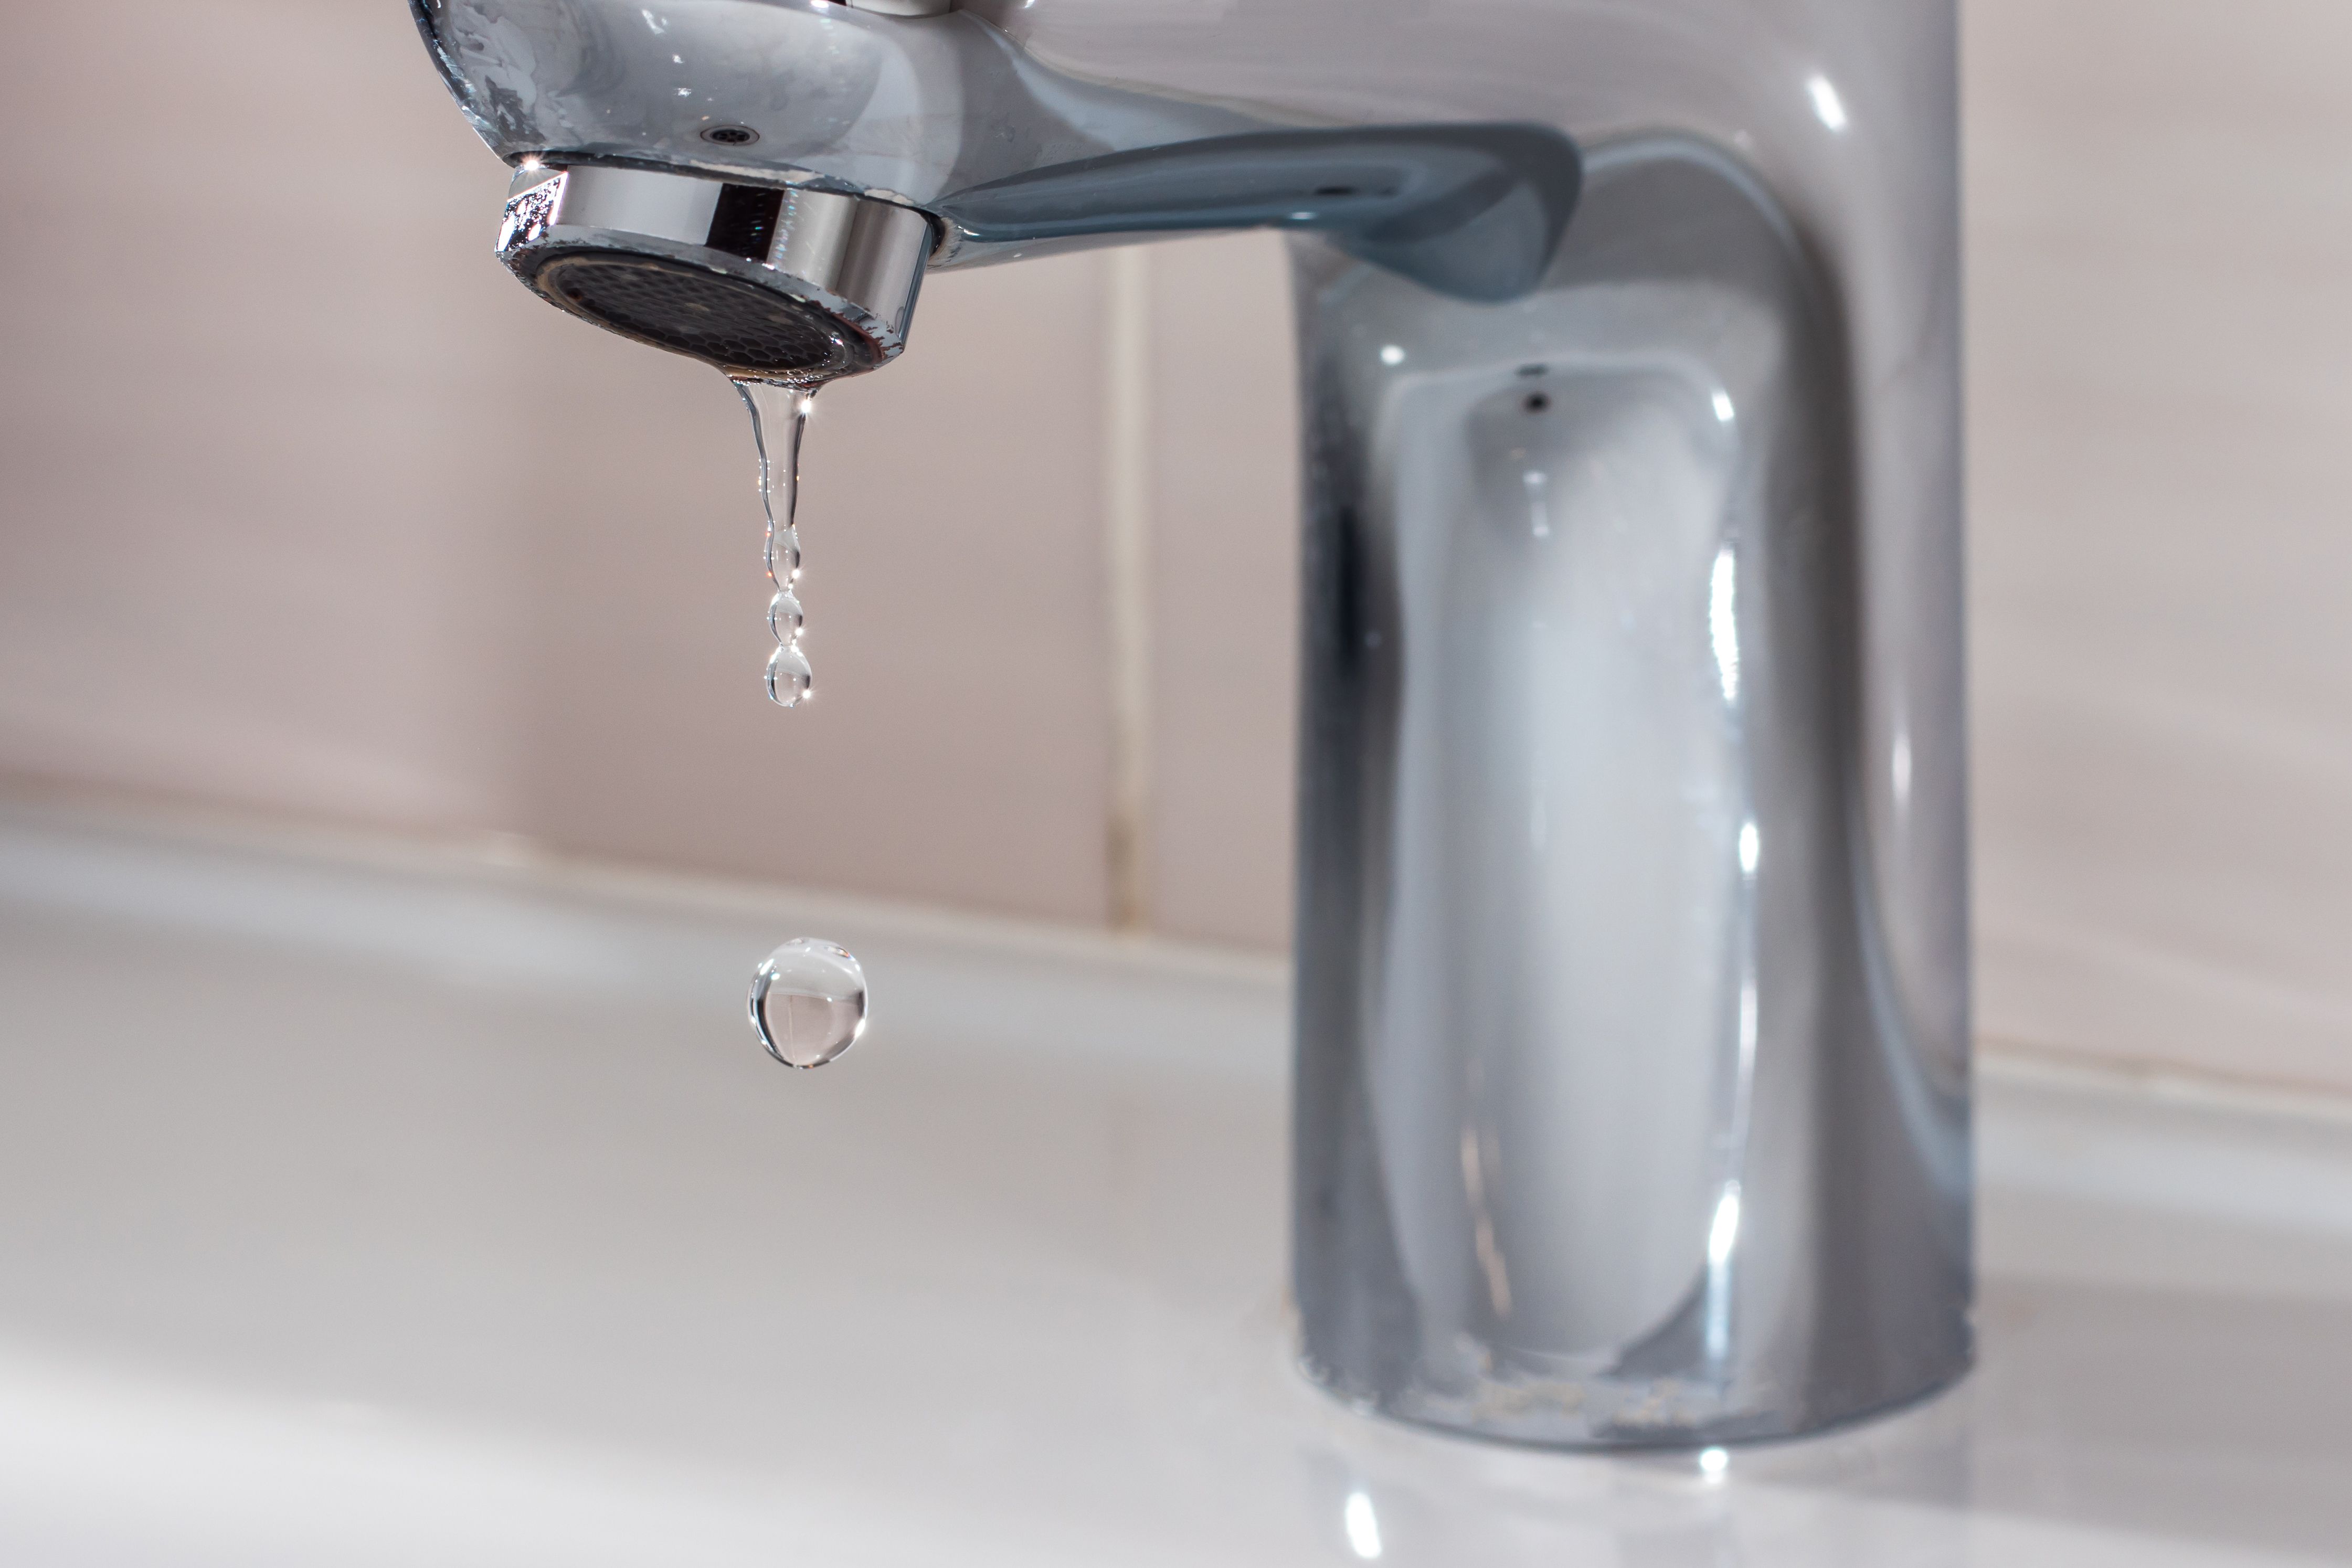 How to Fix a Leaky Faucet - 22 Easy Steps to Fix a Faucet